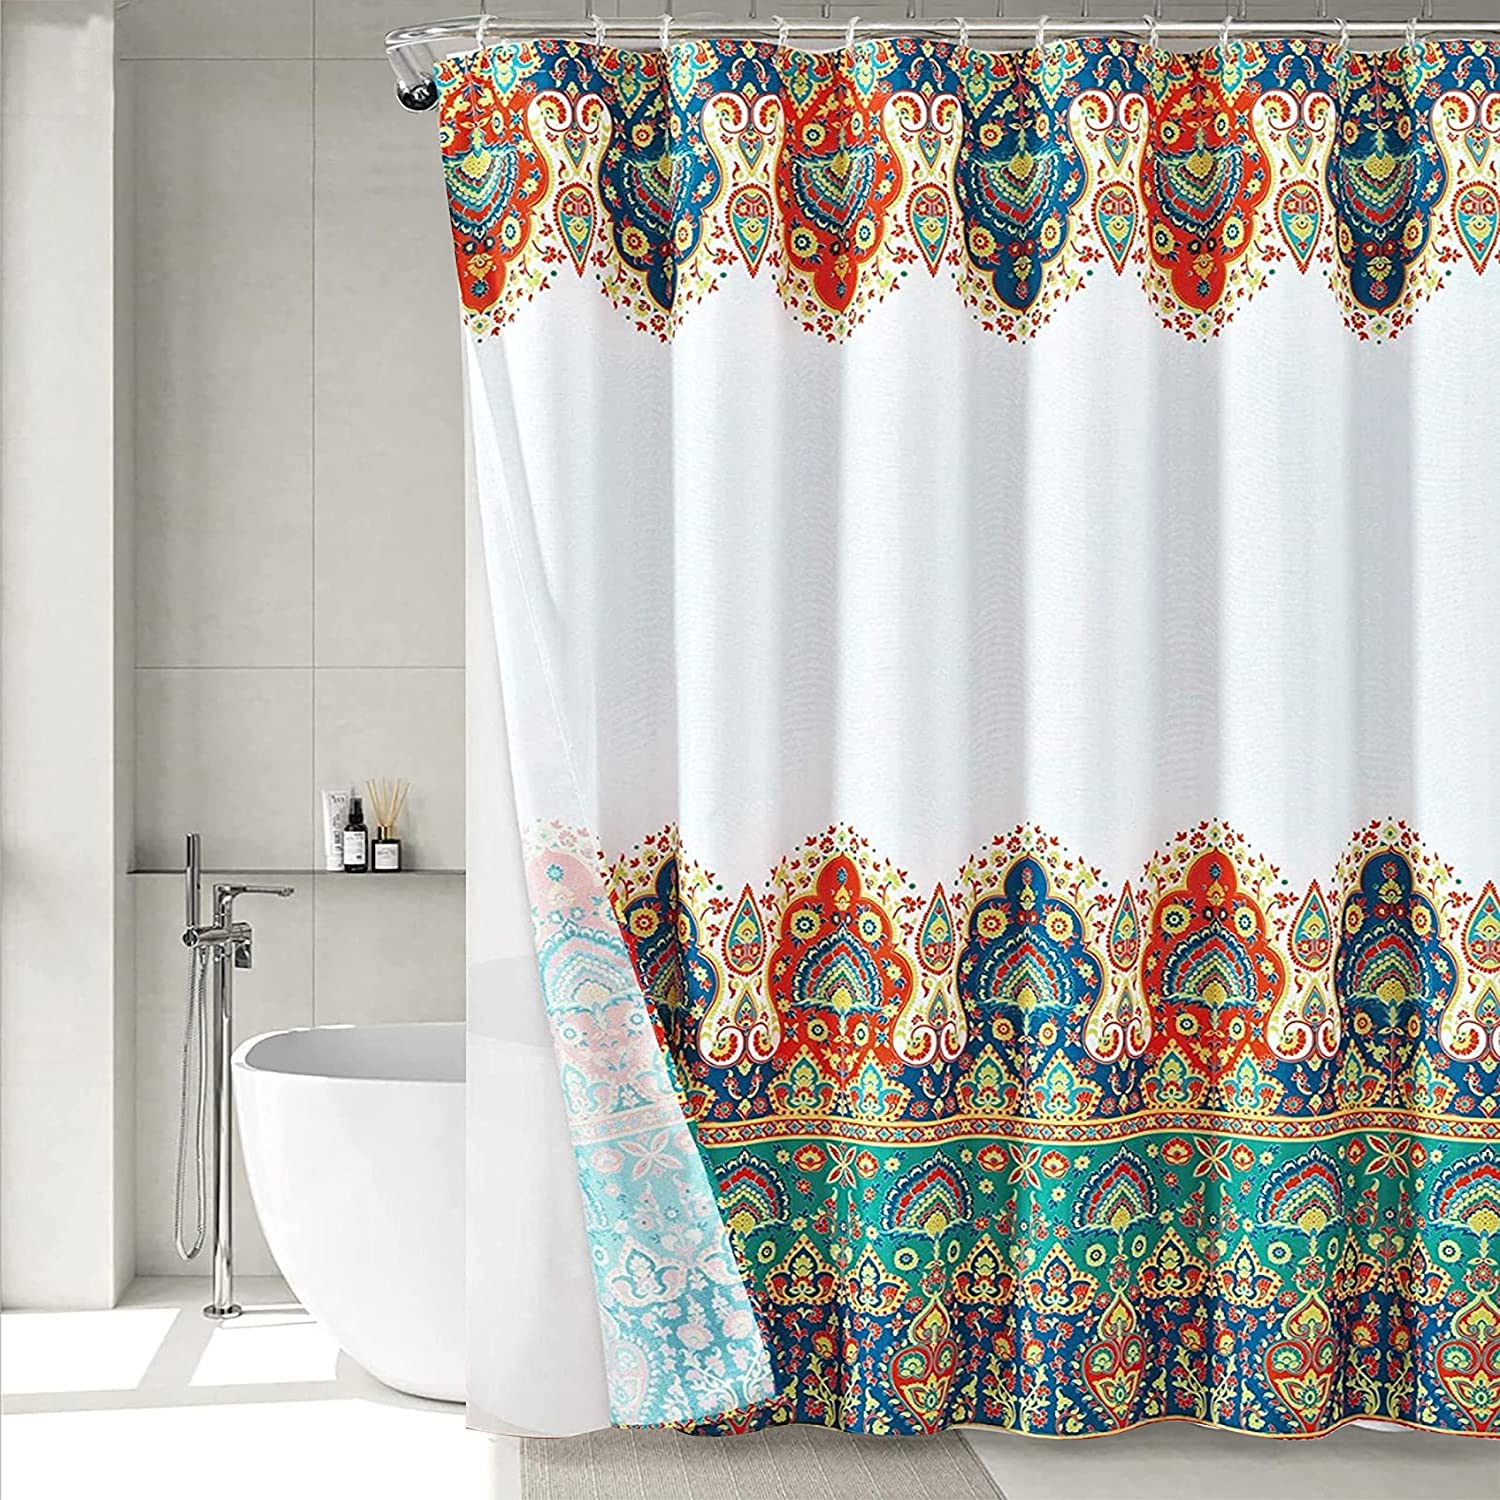 homewards Premium Polyester Floral Design Shower Curtain with 12 Metal Hooks | SS Ball Bearing Rings